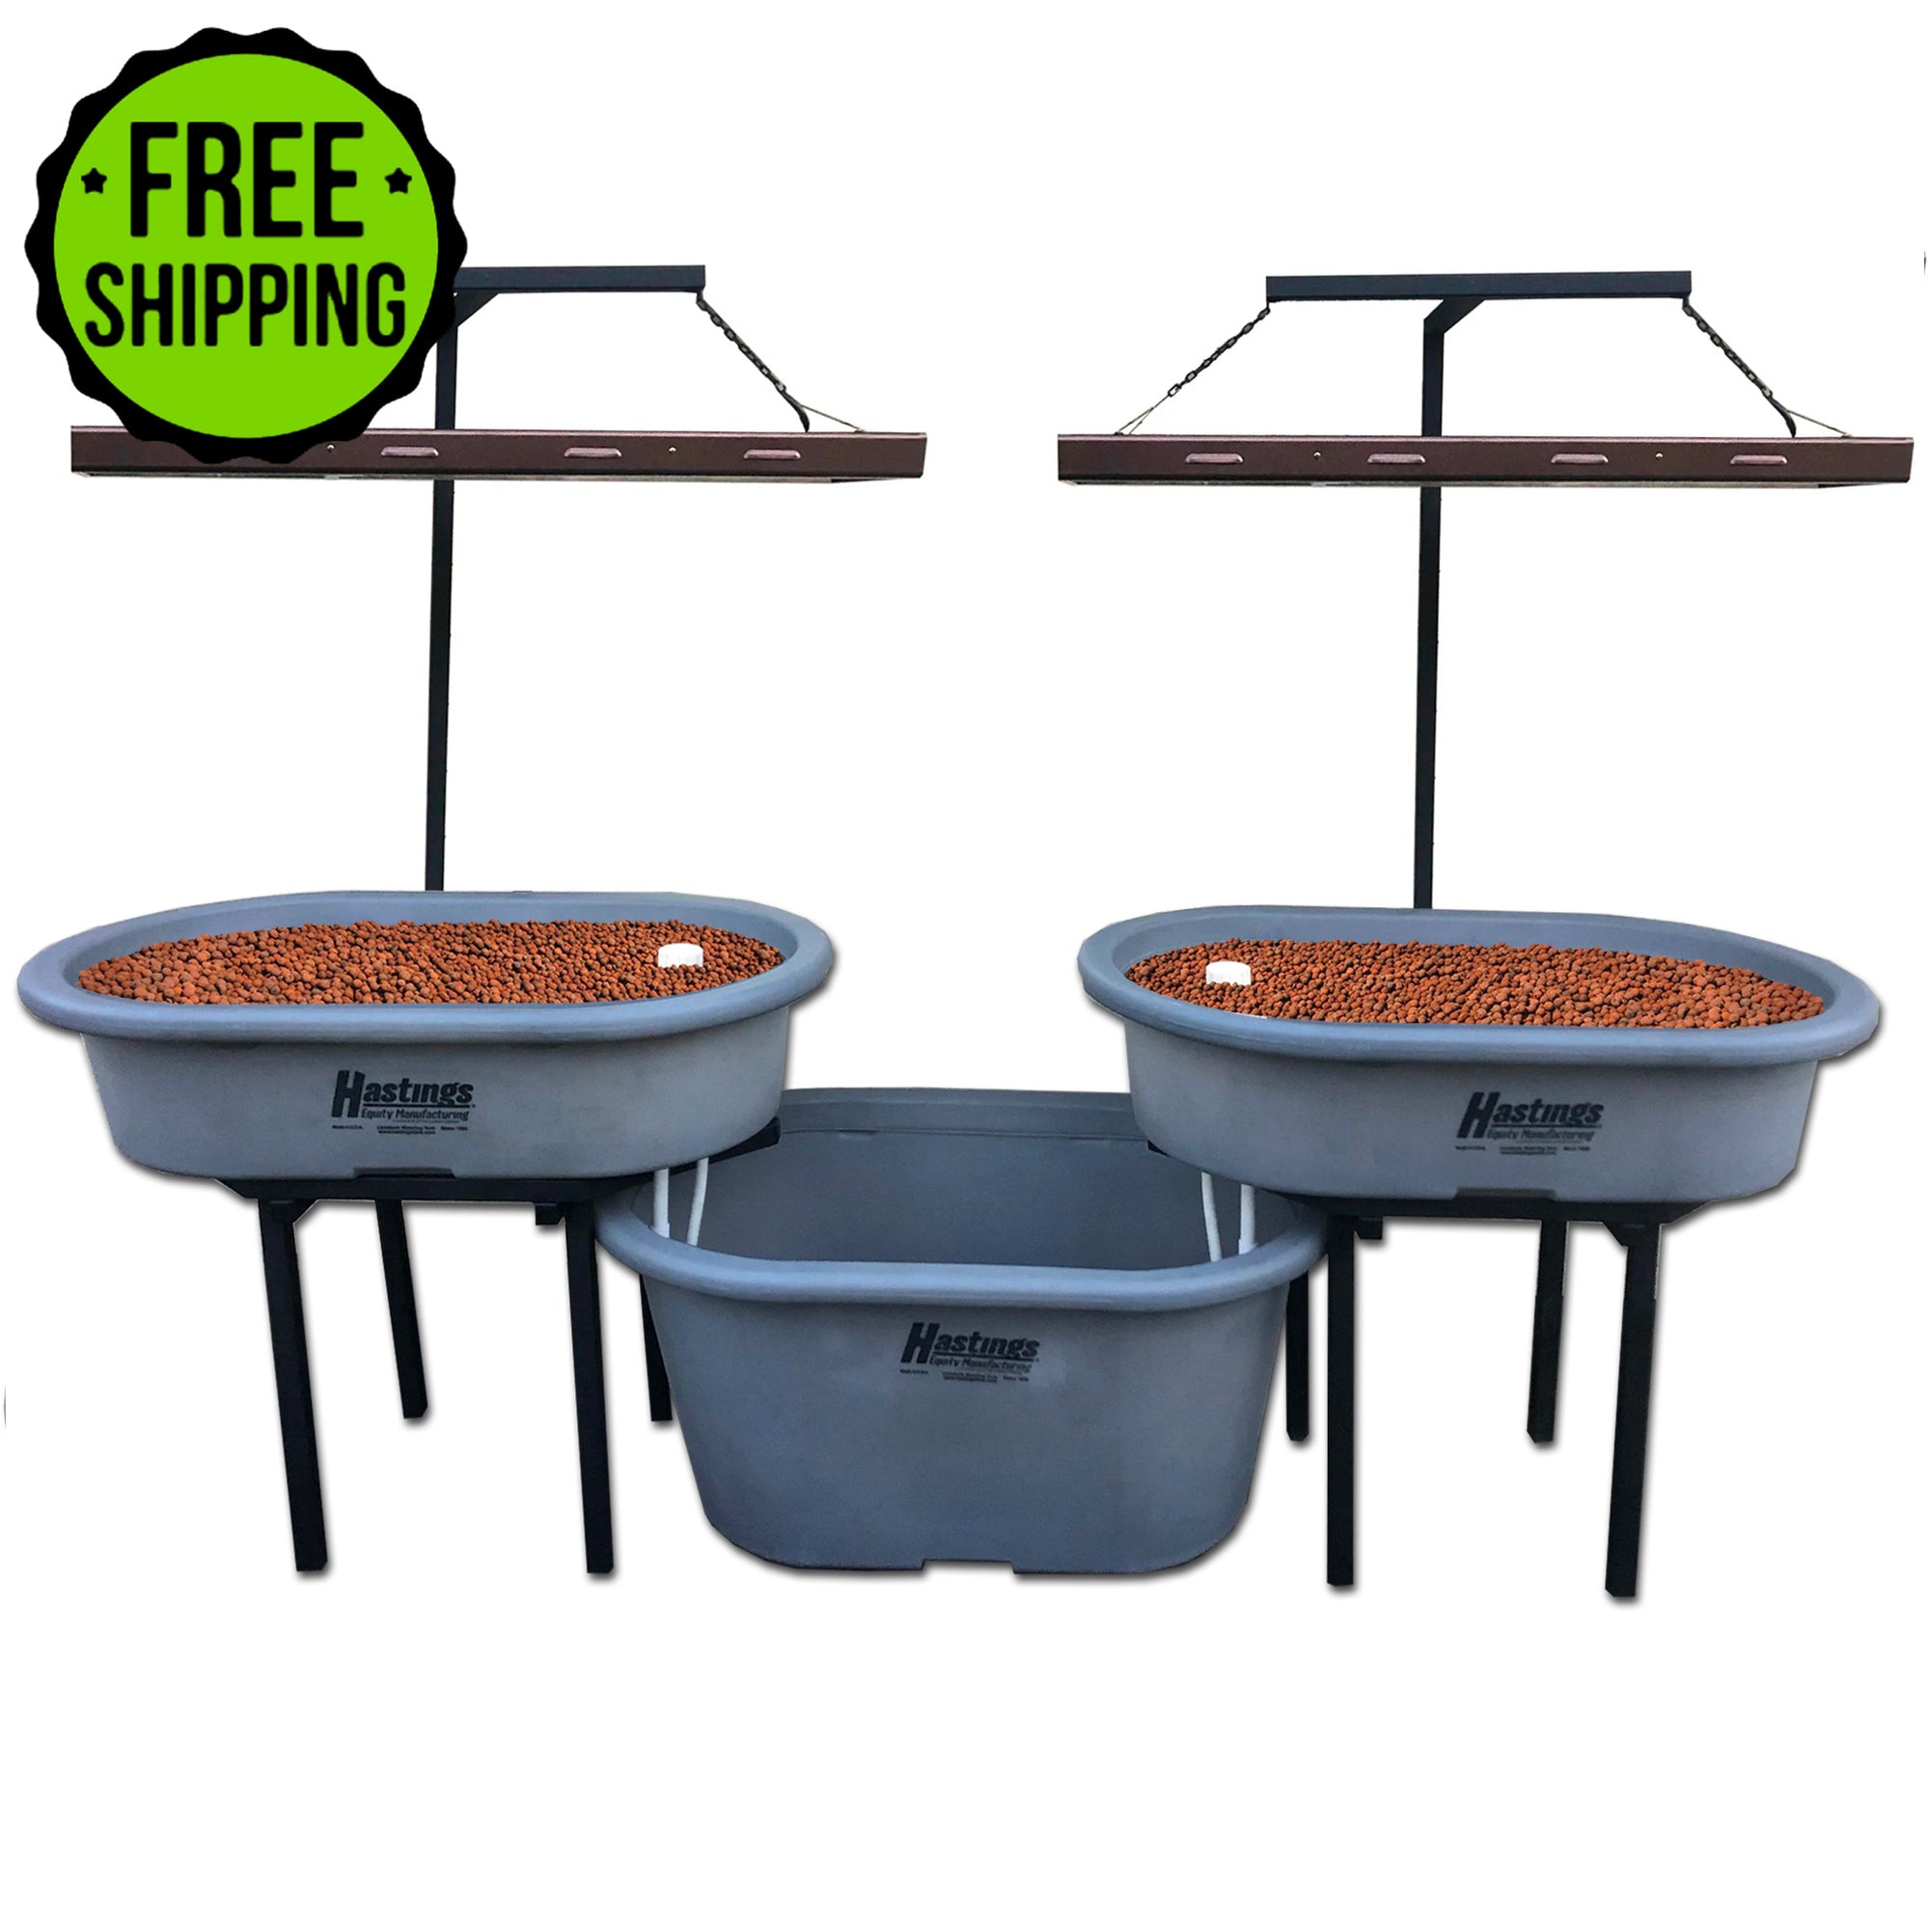 Two Go Green Double Aquaponics Systems with the word free shipping on them.